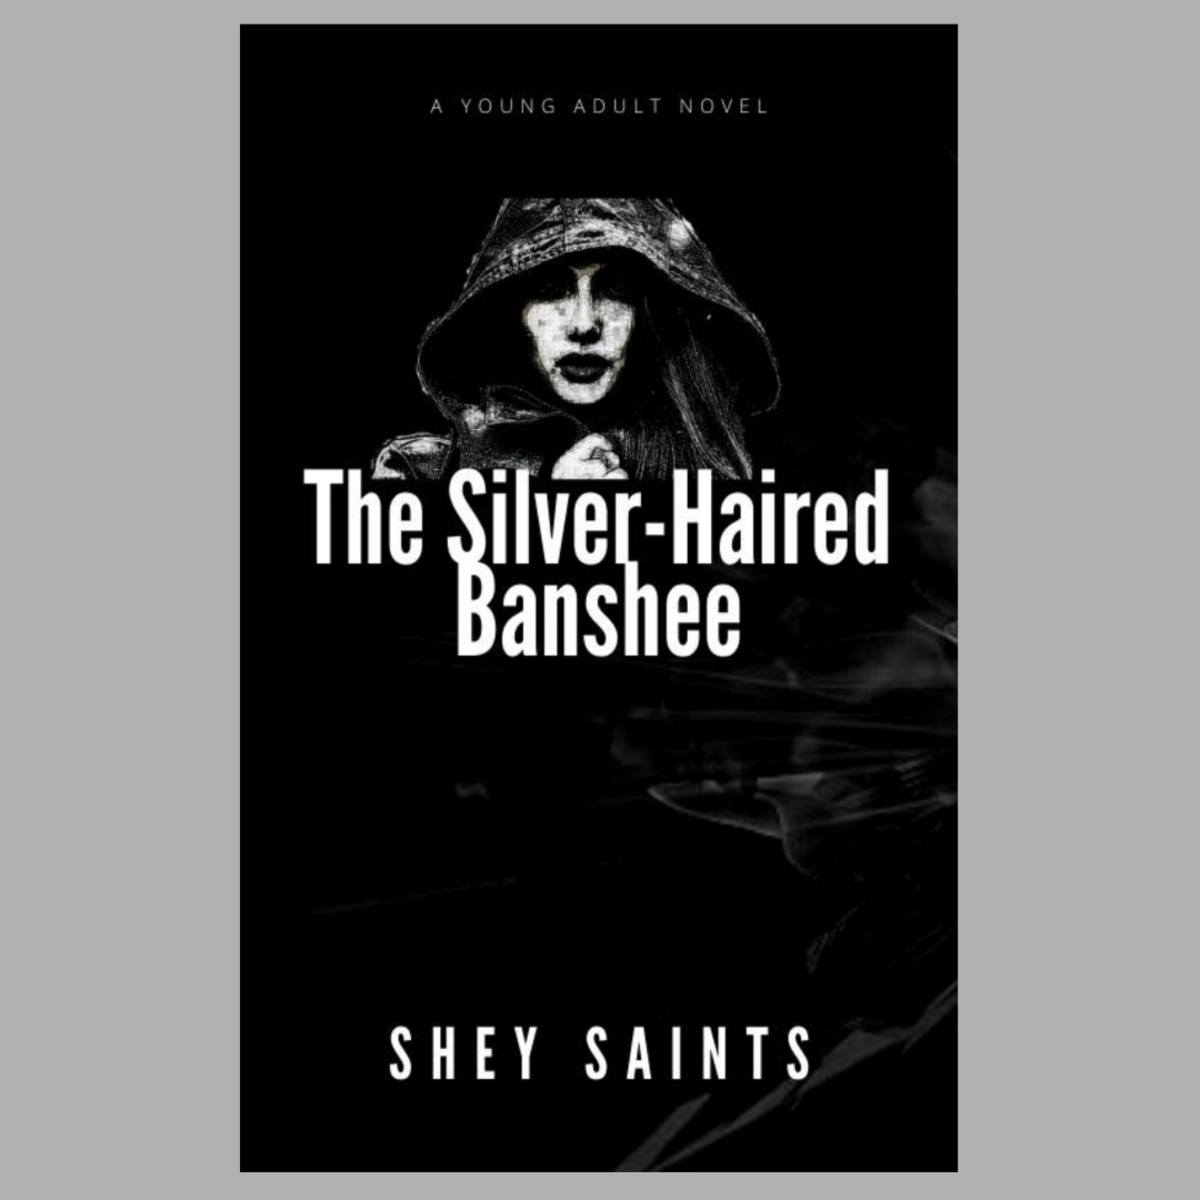 My Debut Novel: The Silver-Haired Banshee